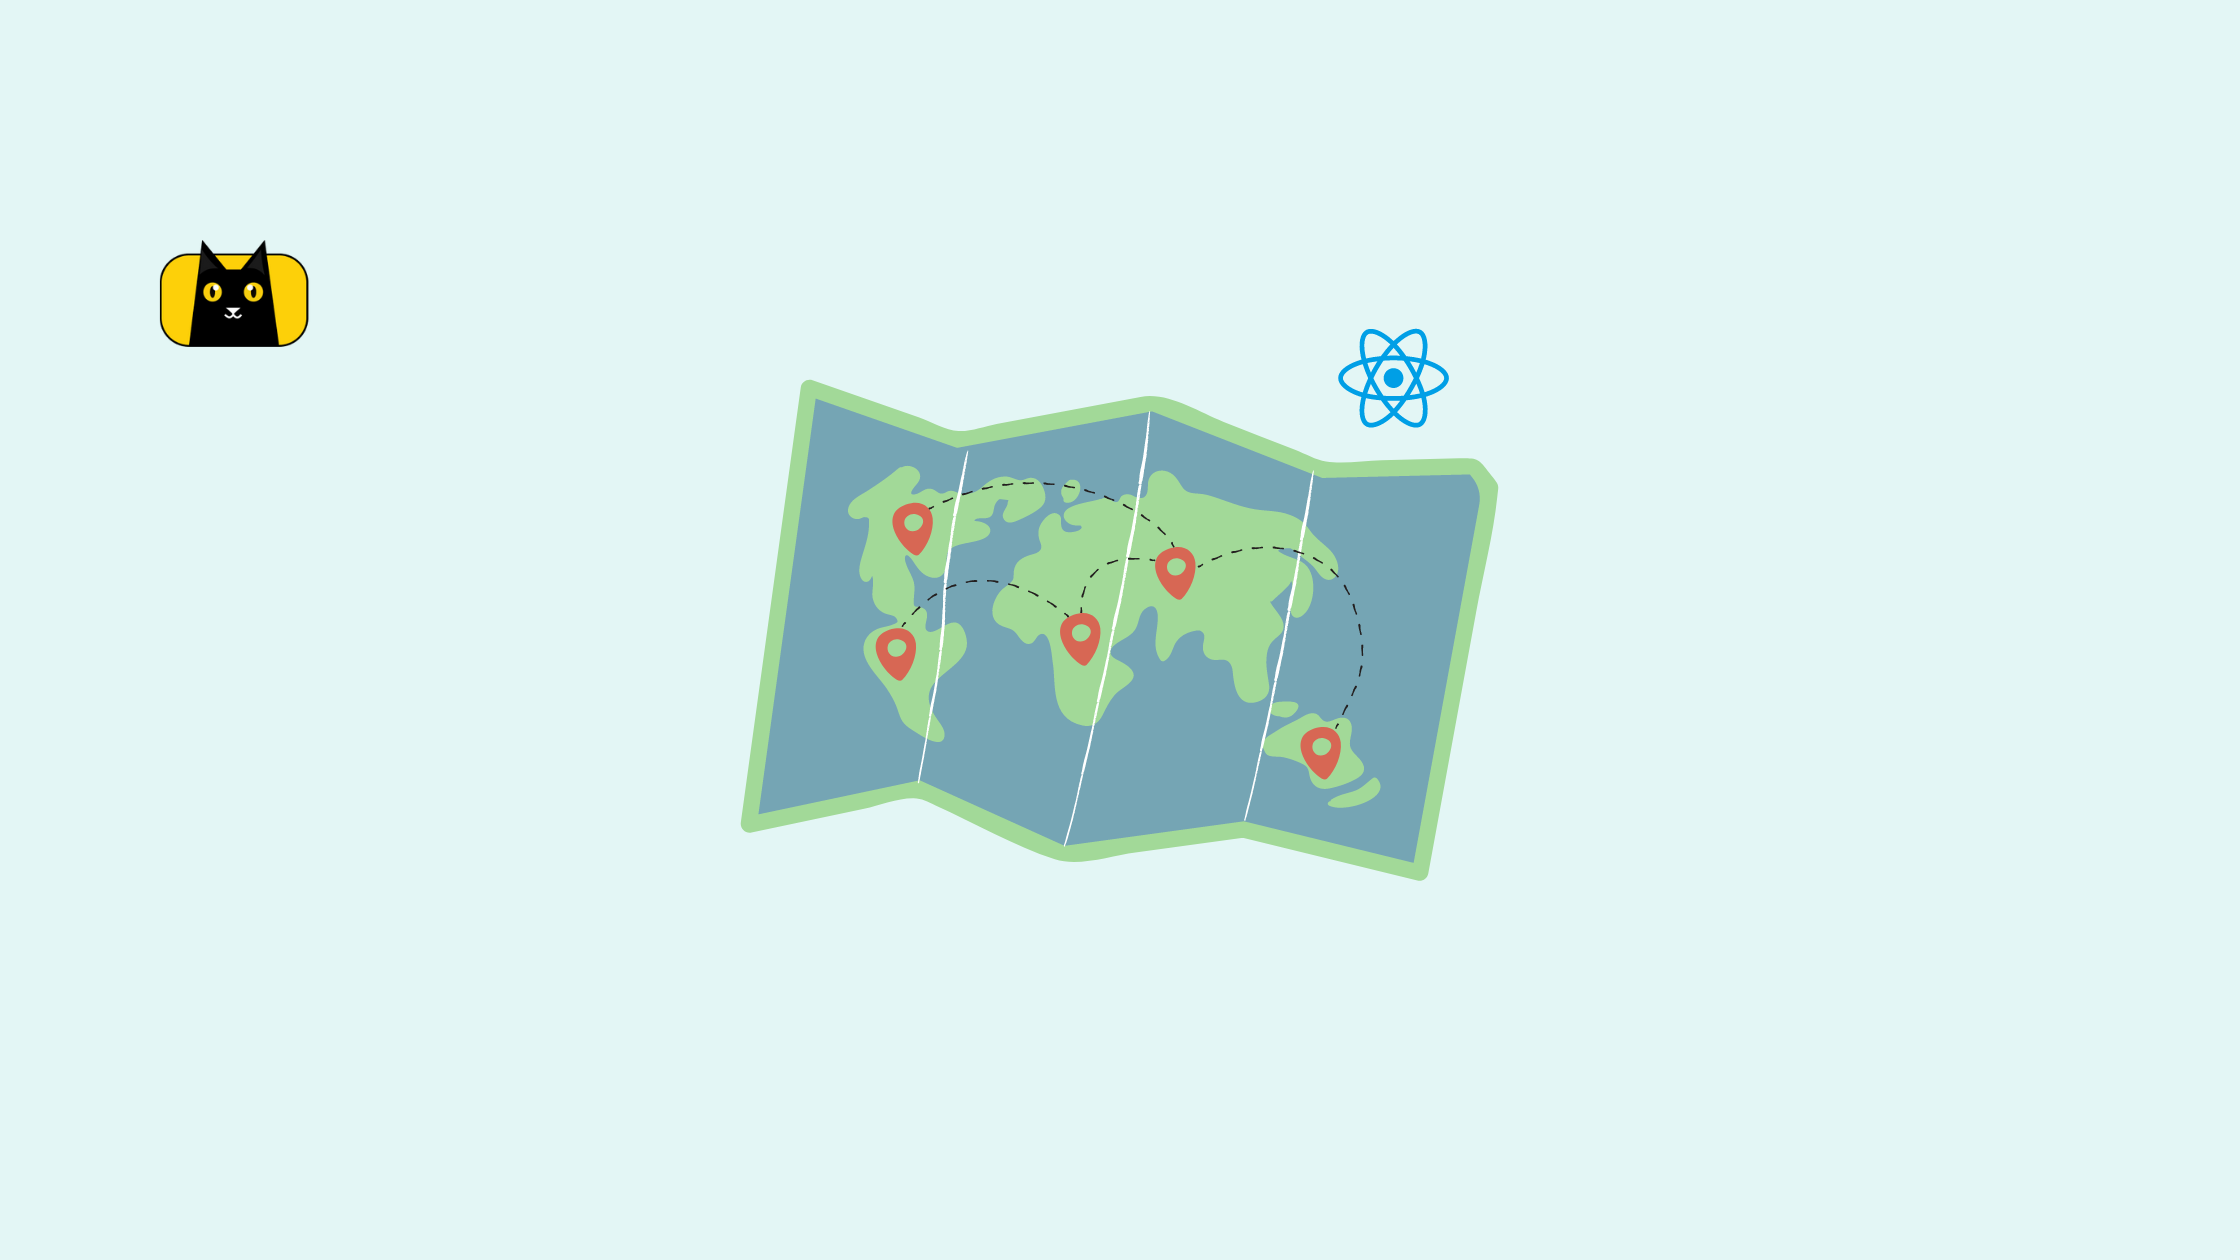 A picture of a map, a React logo, and a CopyCat logo.